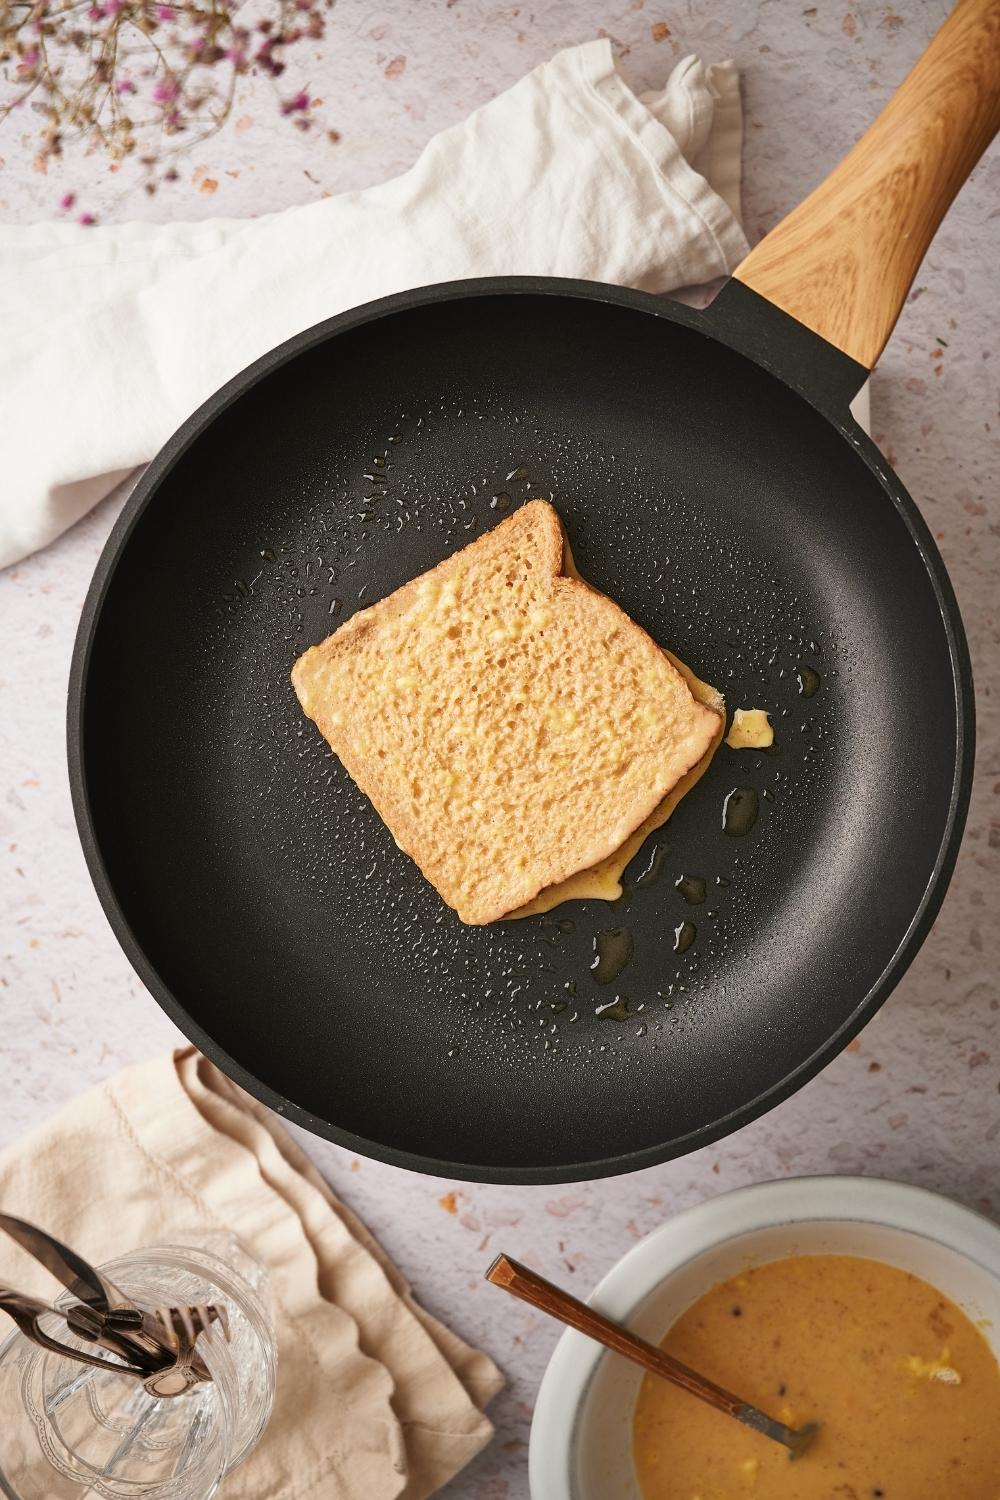 A slice of french toast cooking in a black pan with a wooden handle. Next to the pan is a bowl of french toast batter.